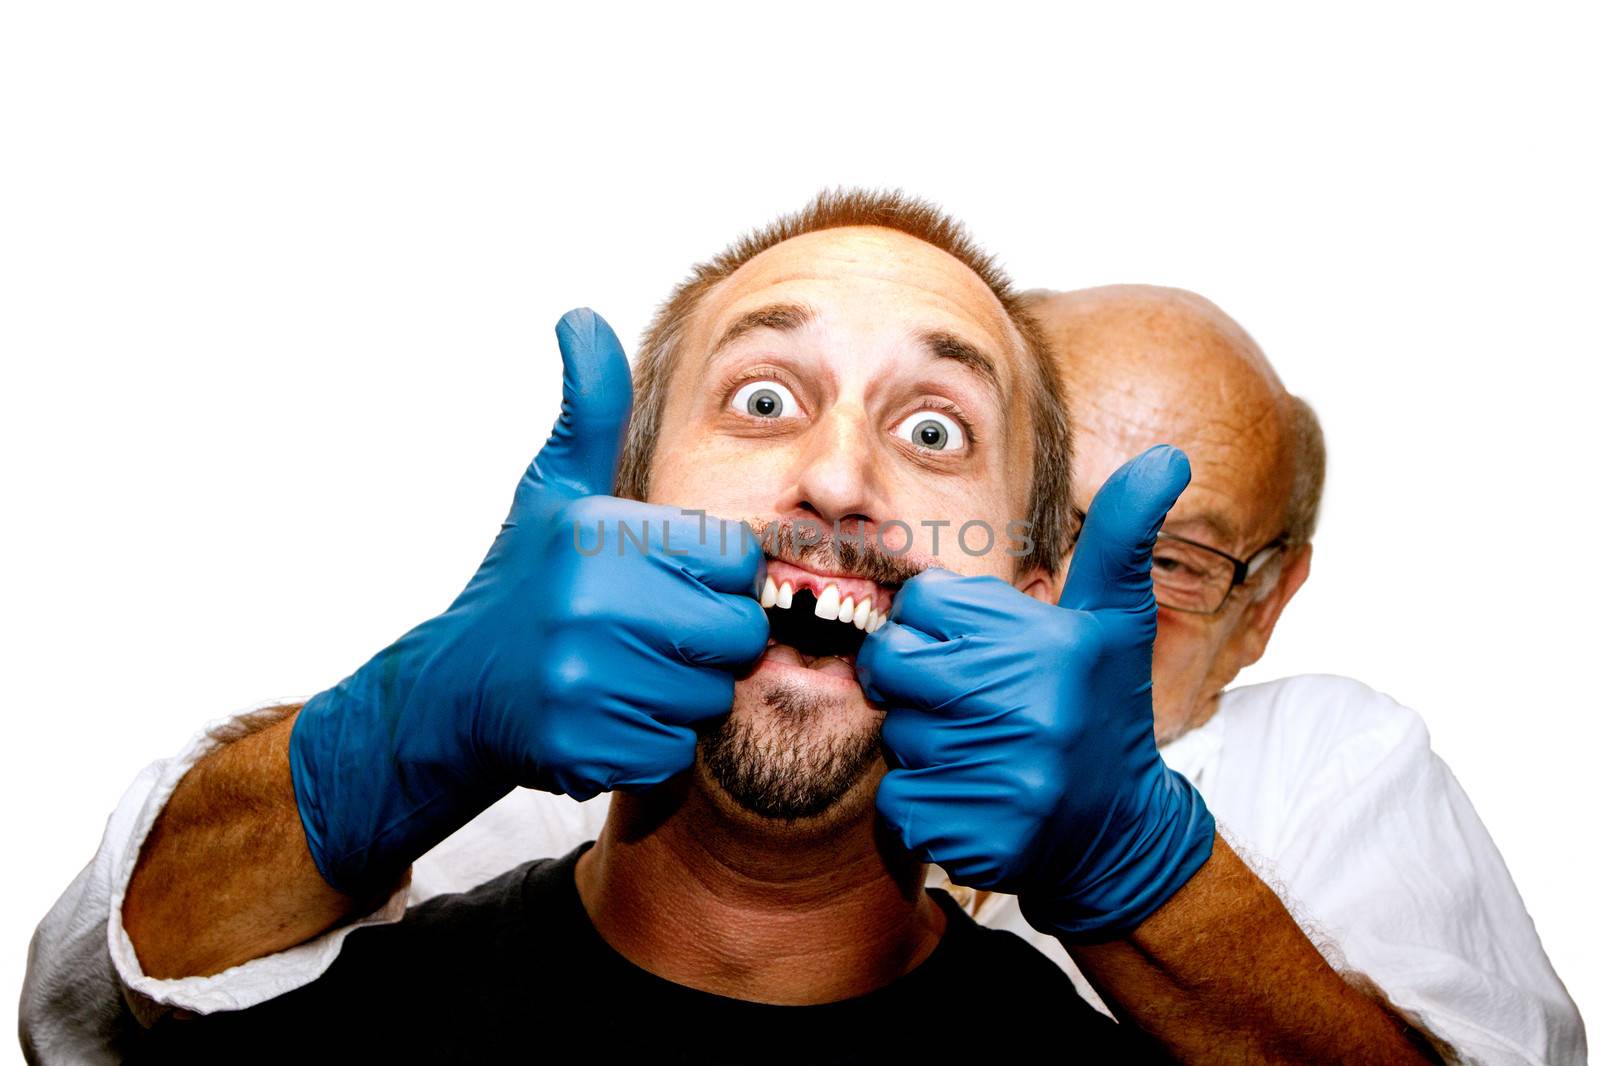 A scary dentist visit turns for the worst as the dentist tries for a more aggressive technique.